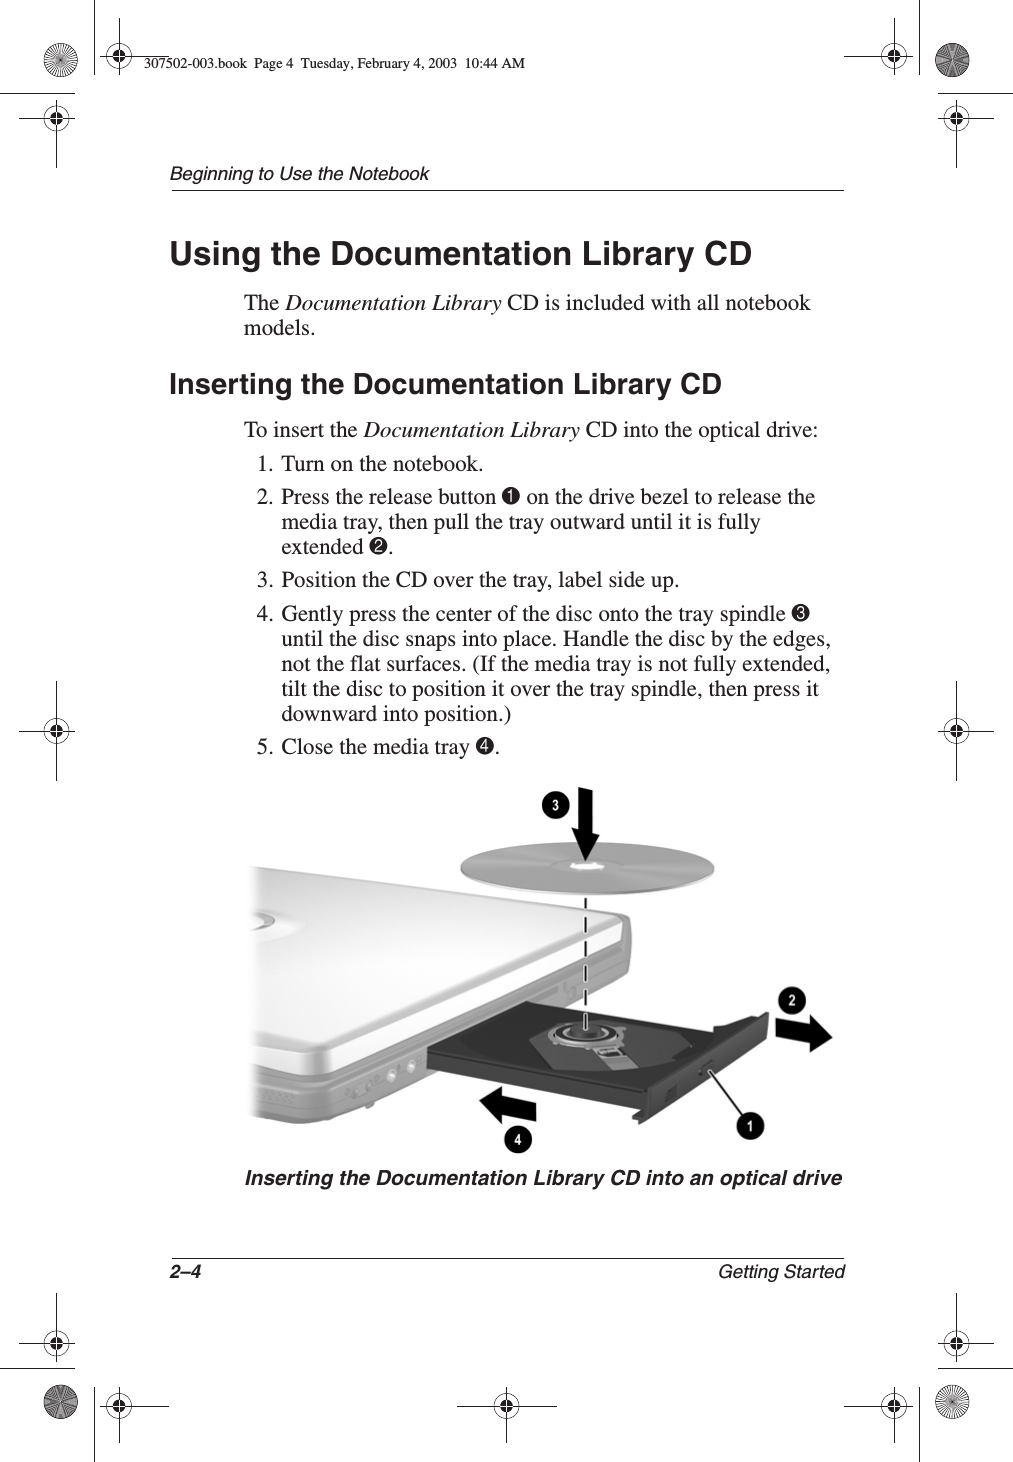 2–4 Getting StartedBeginning to Use the NotebookUsing the Documentation Library CDThe Documentation Library CD is included with all notebook models.Inserting the Documentation Library CDTo insert the Documentation Library CD into the optical drive:1. Turn on the notebook.2. Press the release button 1 on the drive bezel to release the media tray, then pull the tray outward until it is fully extended 2.3. Position the CD over the tray, label side up.4. Gently press the center of the disc onto the tray spindle 3 until the disc snaps into place. Handle the disc by the edges, not the flat surfaces. (If the media tray is not fully extended, tilt the disc to position it over the tray spindle, then press it downward into position.)5. Close the media tray 4.Inserting the Documentation Library CD into an optical drive307502-003.book  Page 4  Tuesday, February 4, 2003  10:44 AM